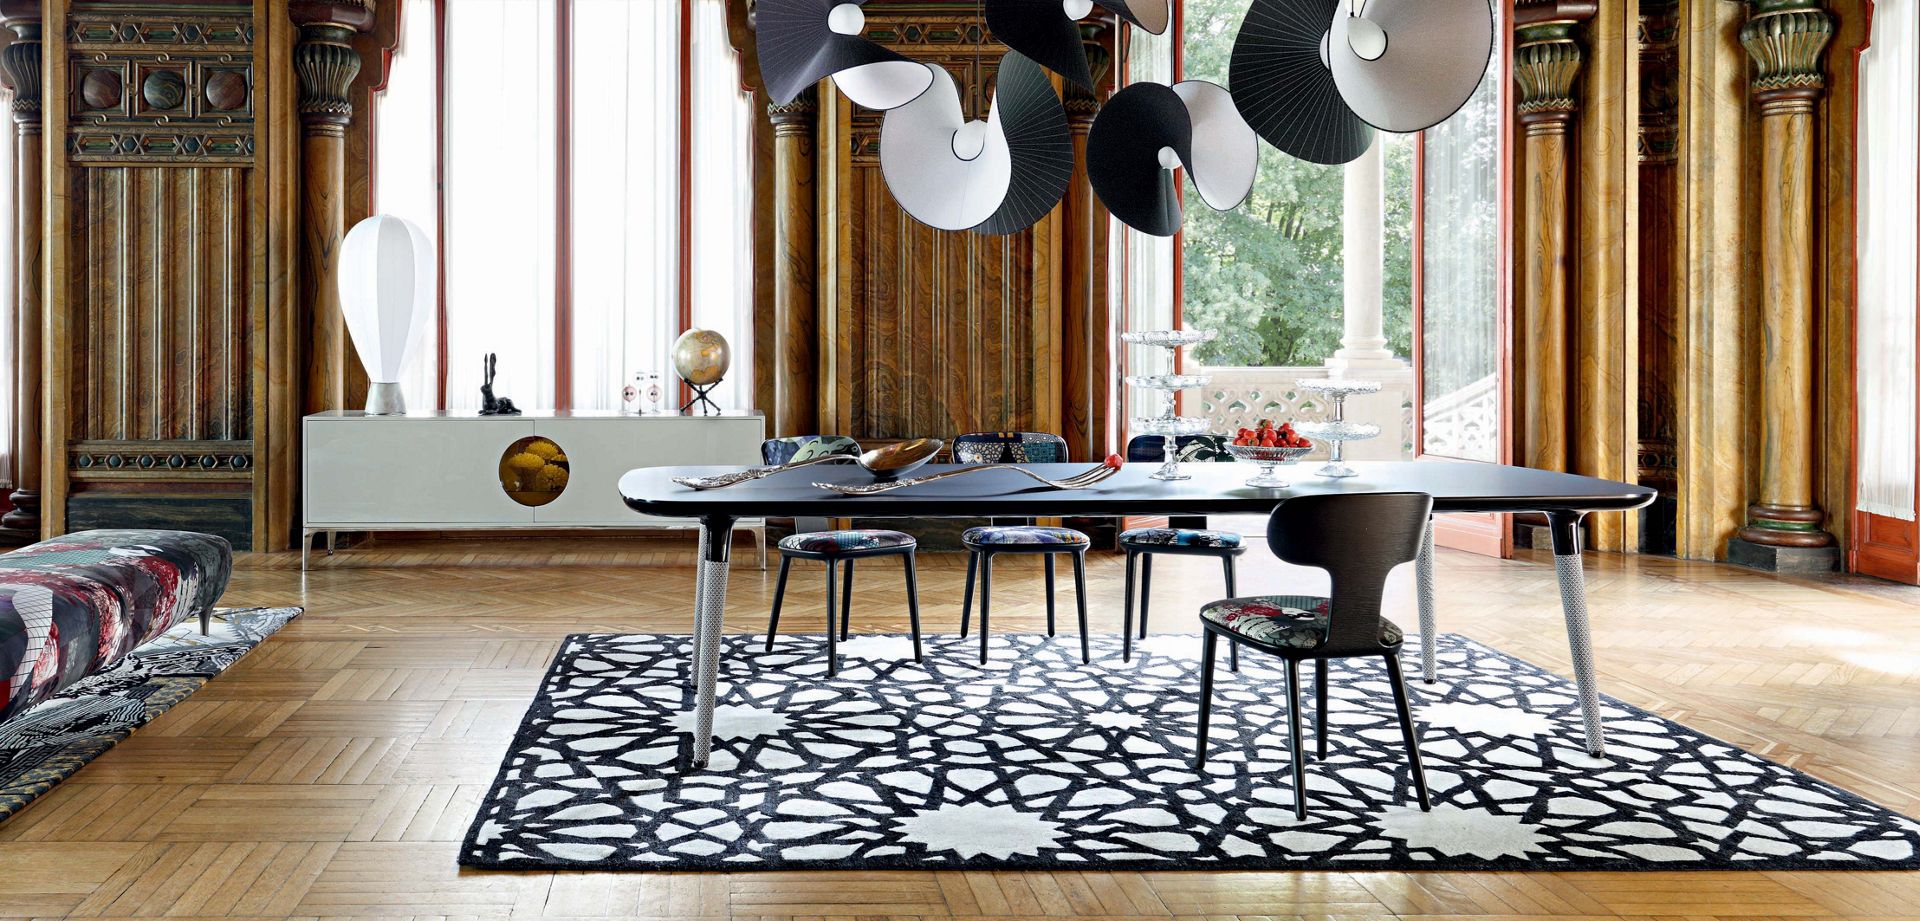 The Globe Trotter Collection by Marcel Wanders for Roche Bobois